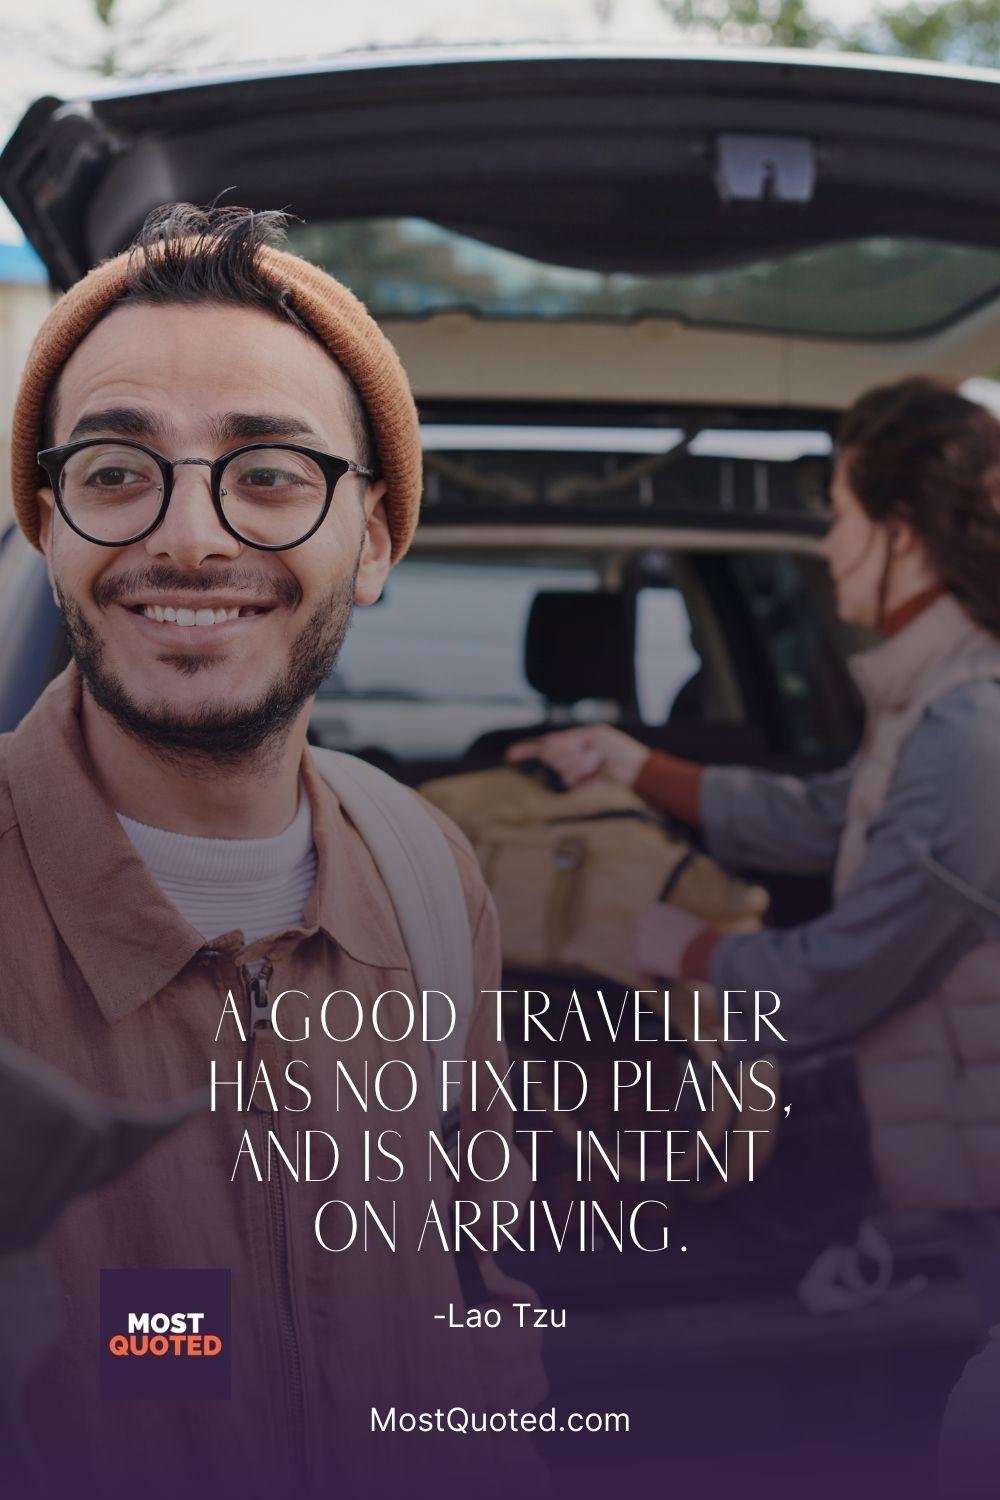 A good traveller has no fixed plans, and is not intent on arriving. - Lao Tzu